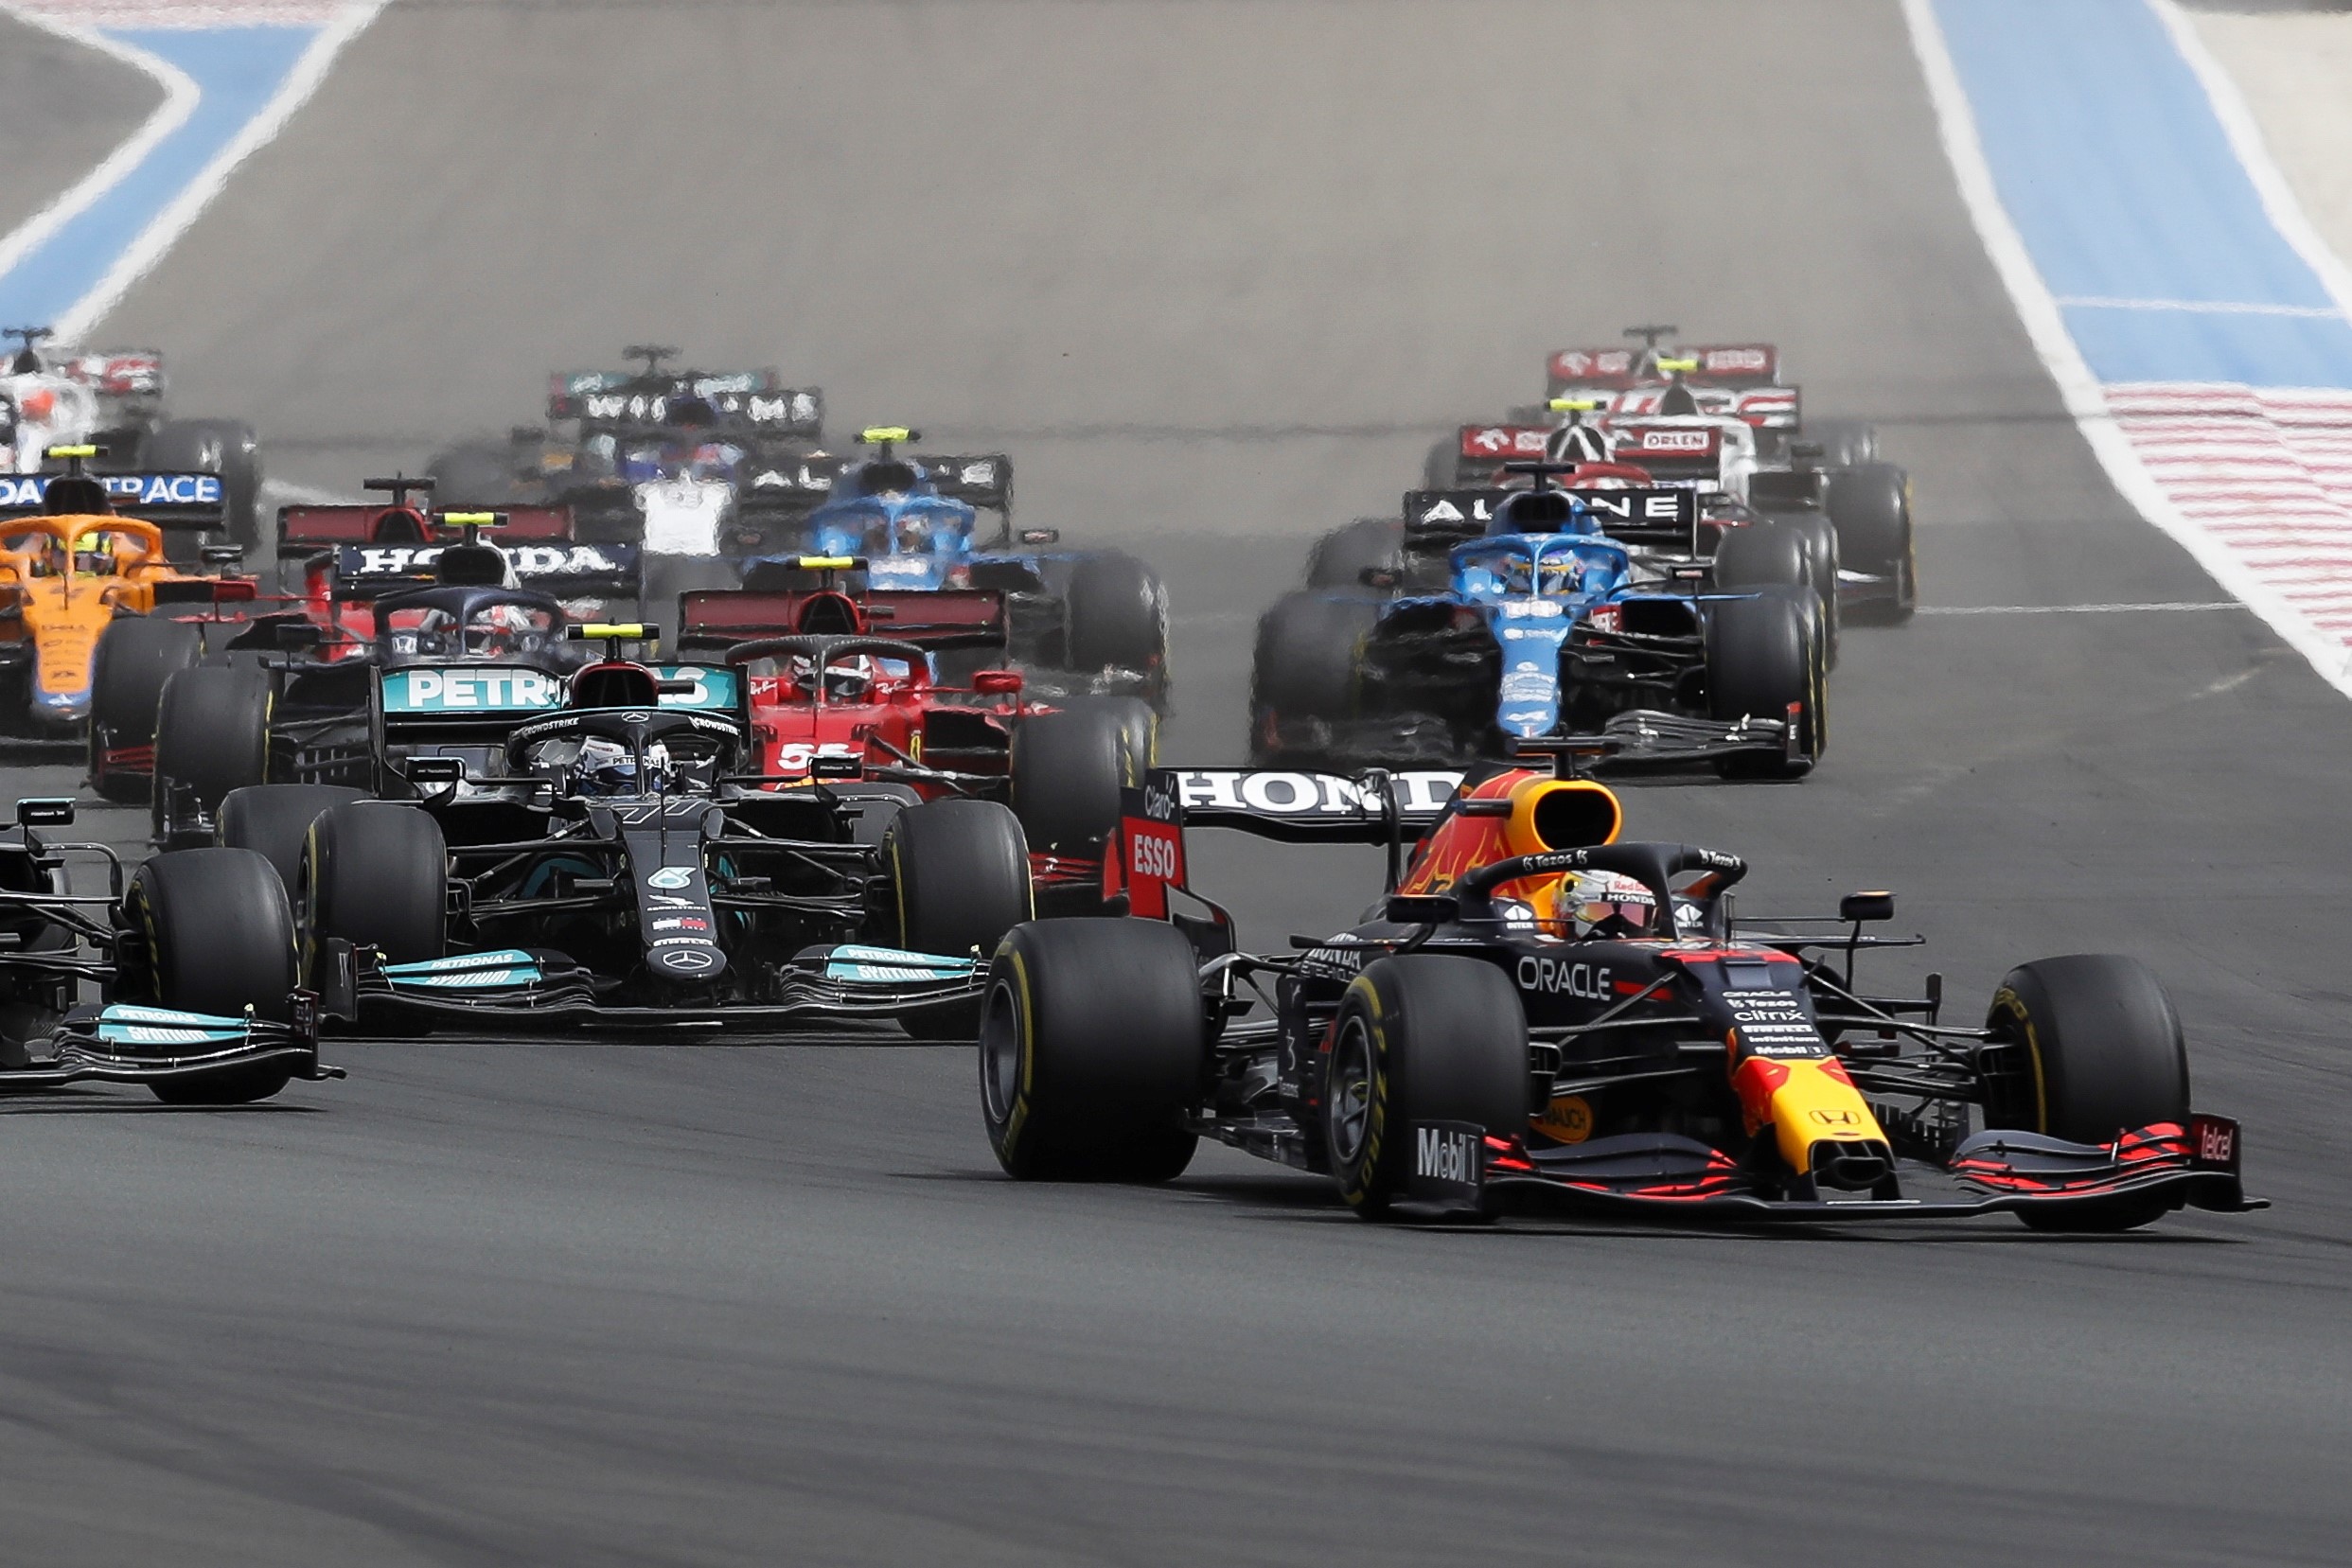 epa09288130 Dutch Formula One driver Max Verstappen (front-R) of Red Bull Racing leads the pack of cars during the start of the French Formula One Grand Prix at Paul Ricard circuit in Le Castellet, France, 20 June 2021.  EPA/SEBASTIEN NOGIER